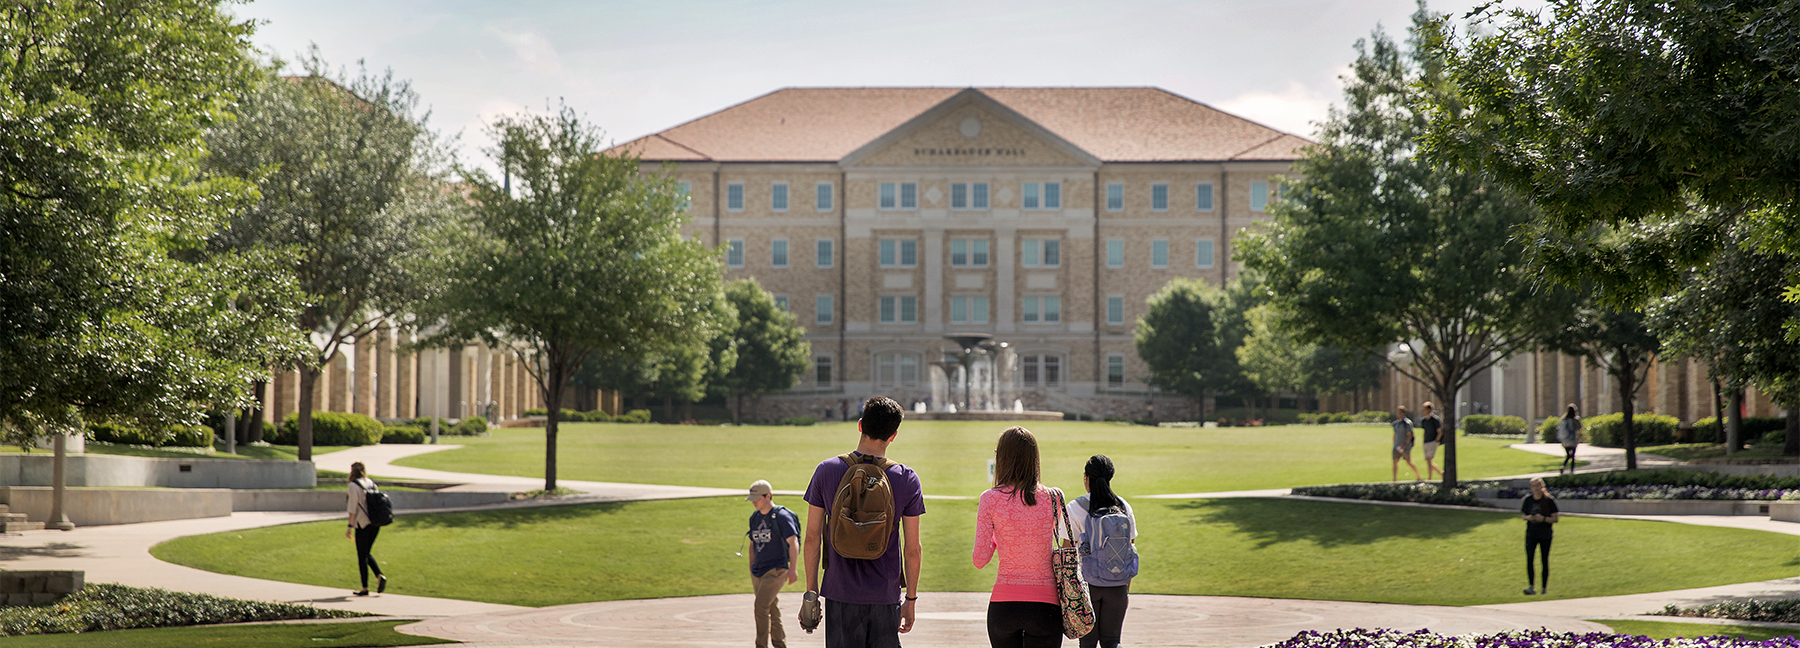 Section Image: TCU campus with students walking 